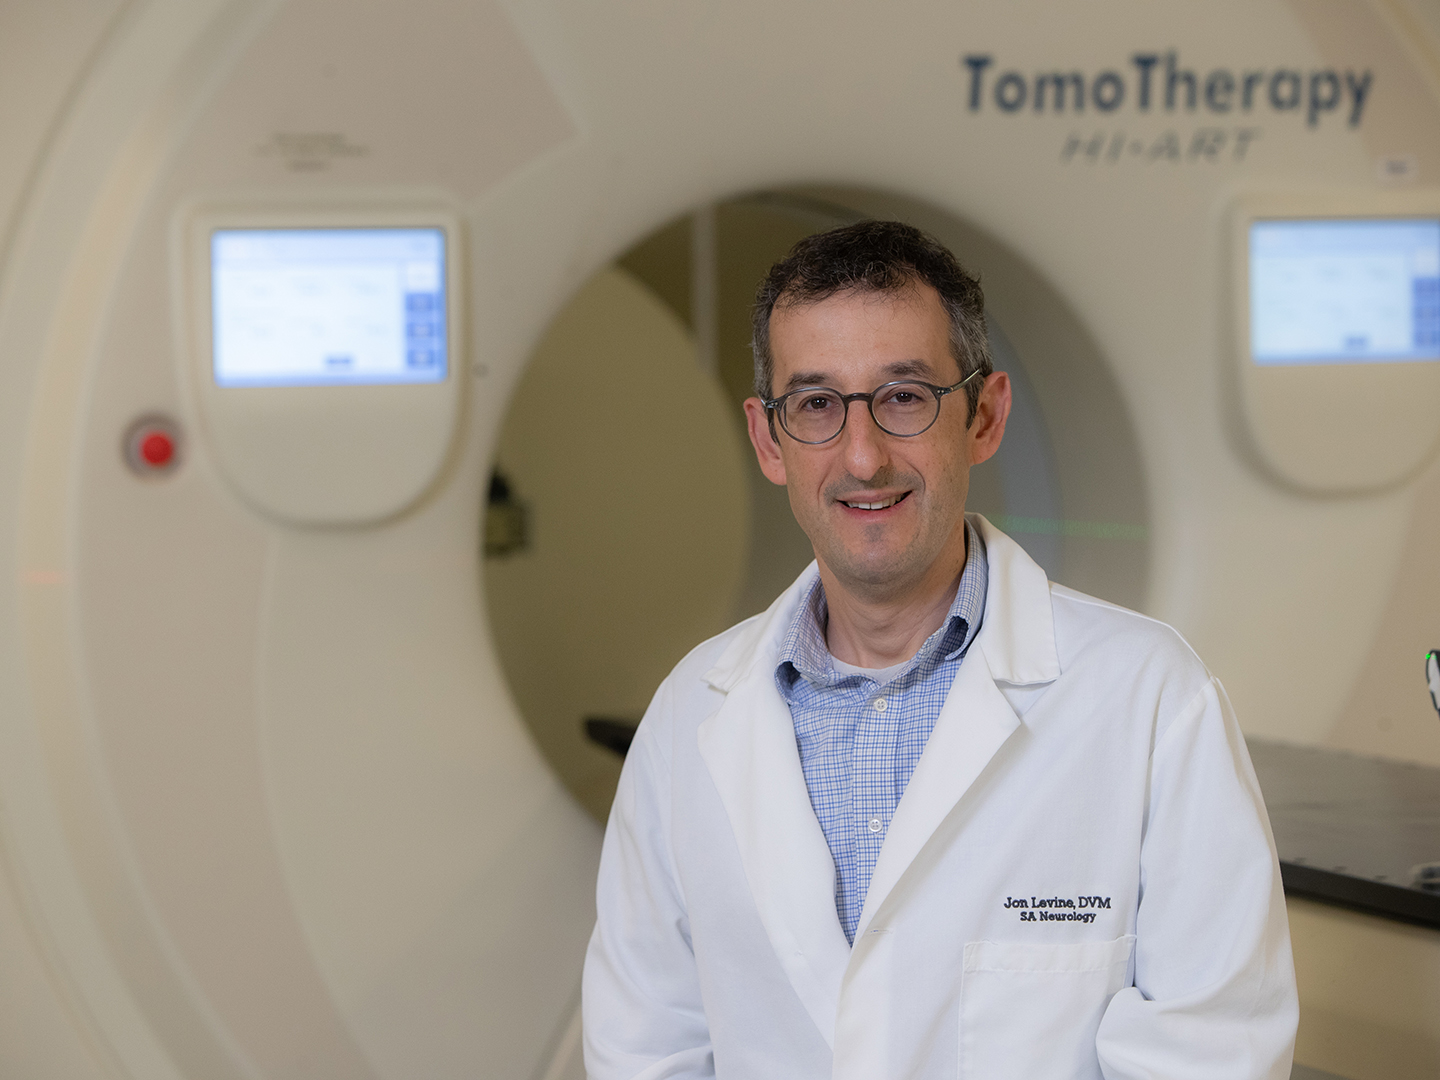 Dr. Jonathan Levine in front of a TomoTherapy machine